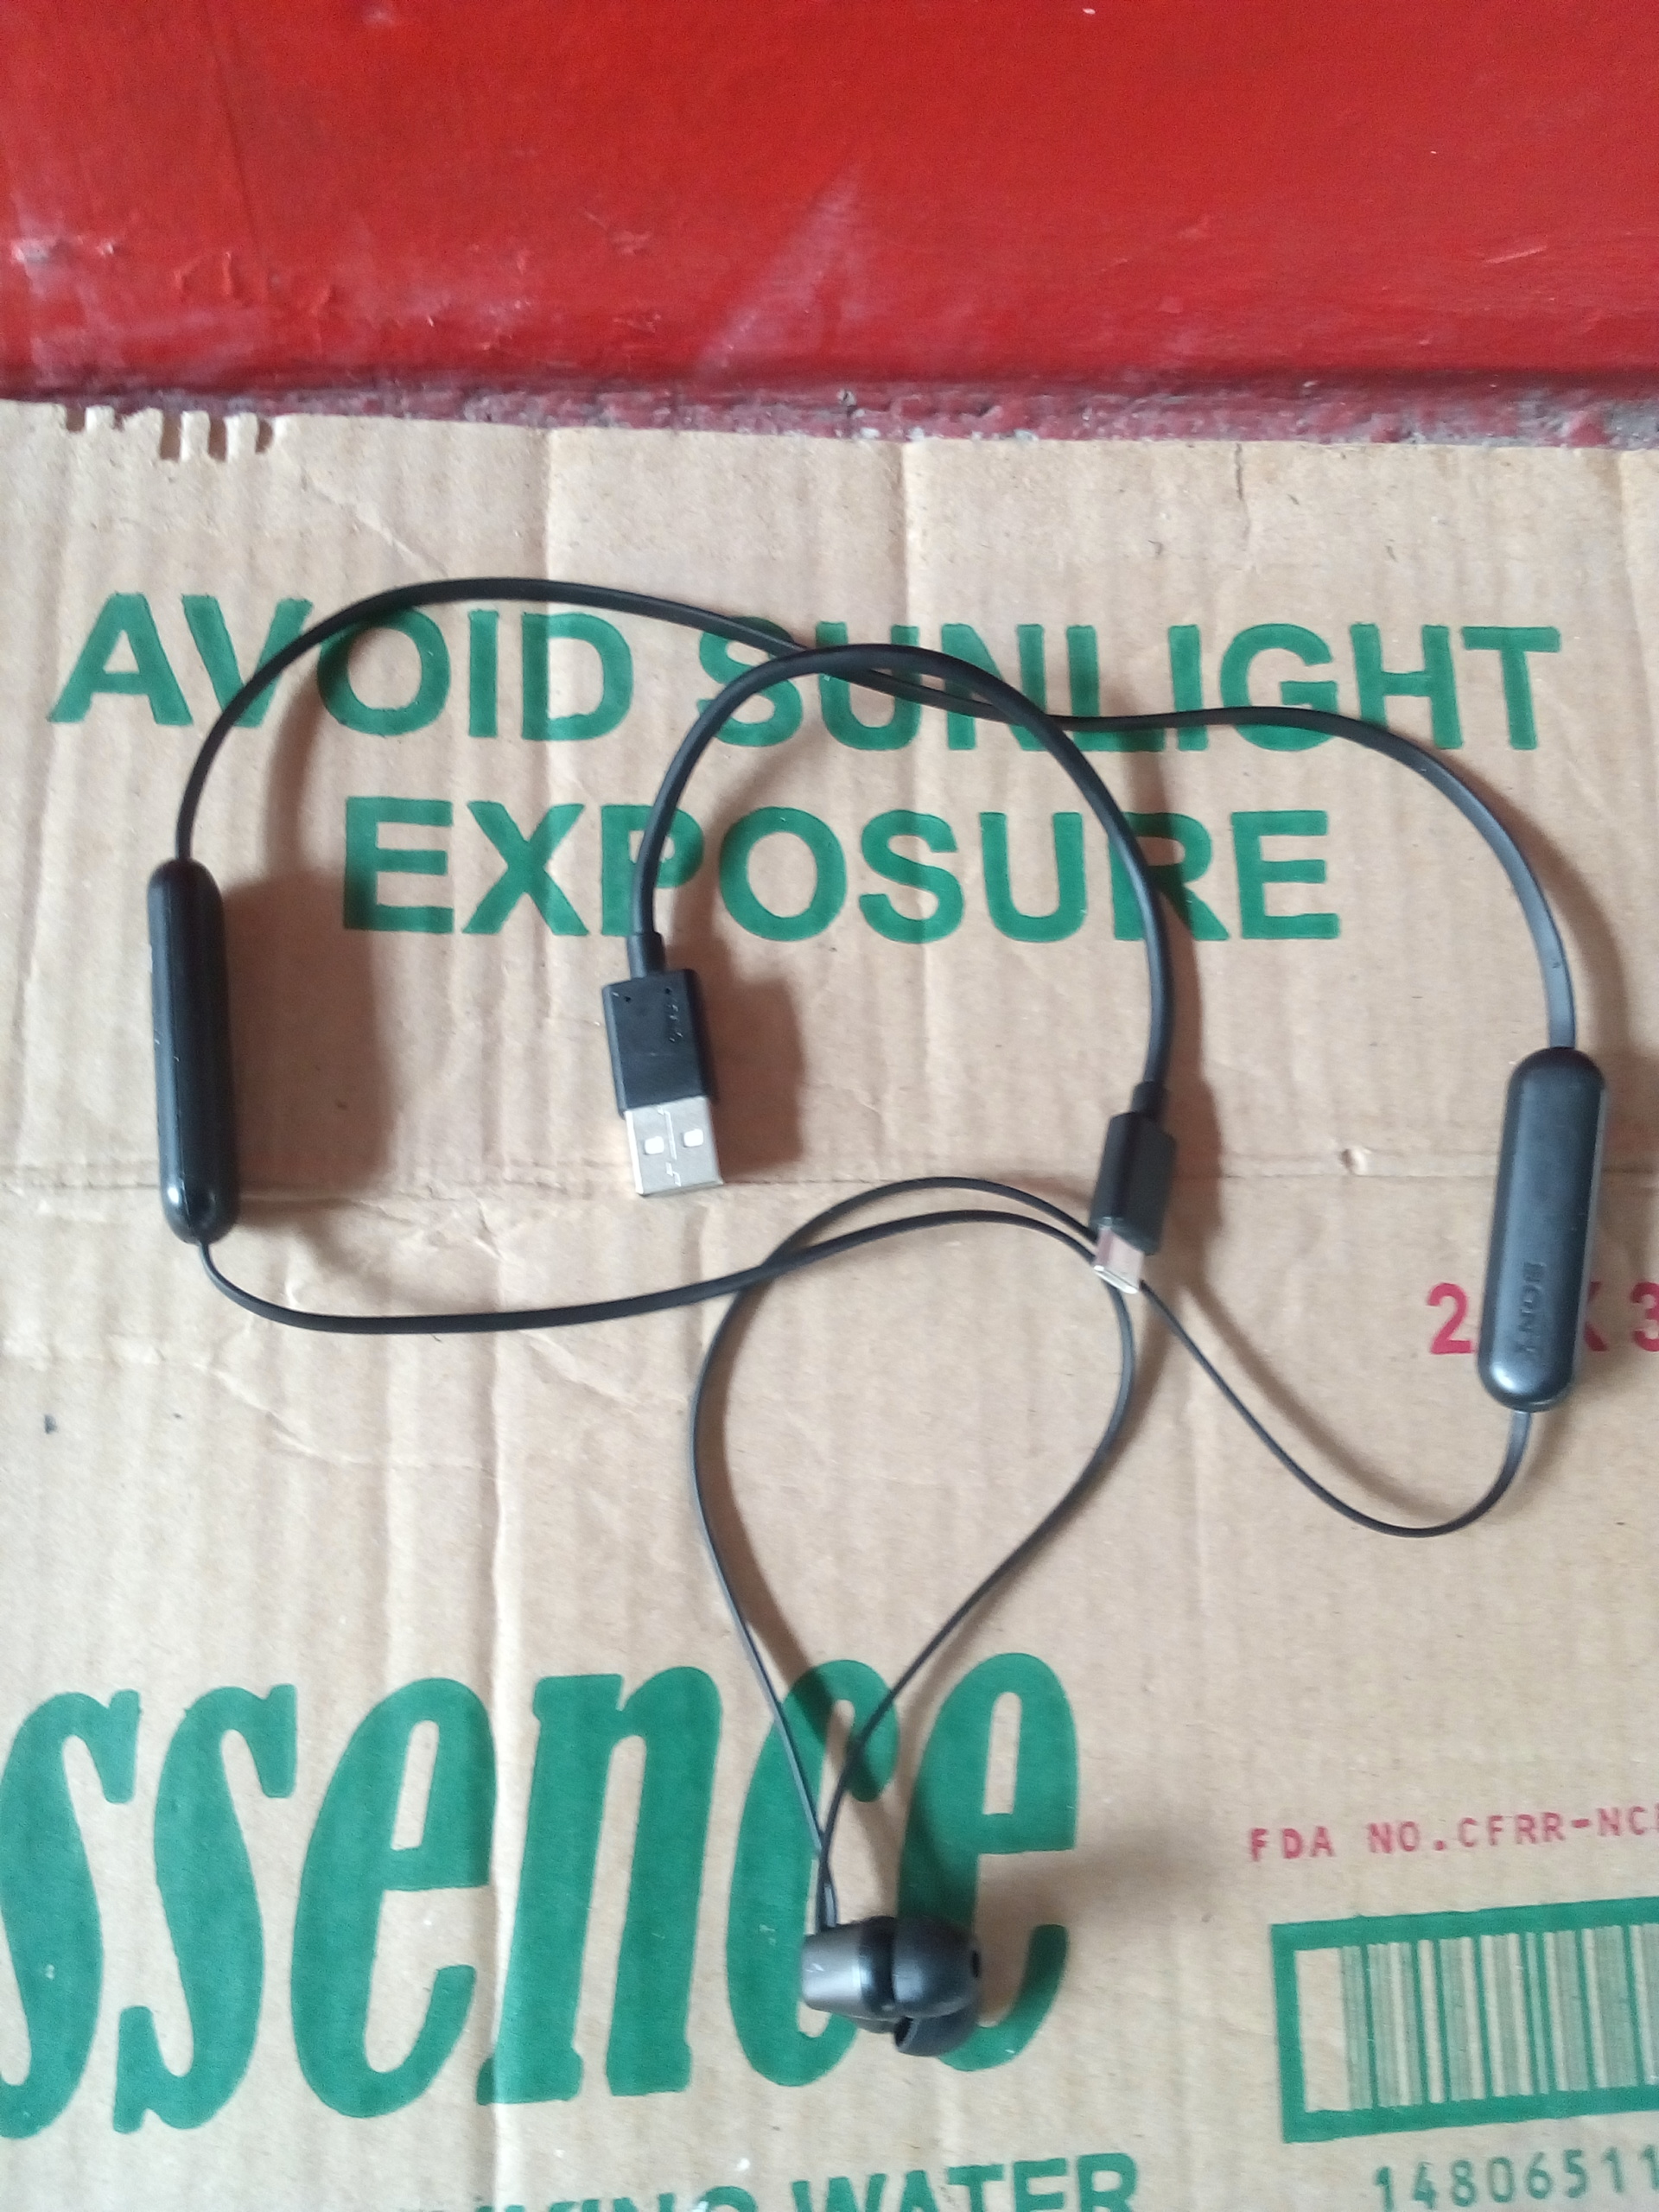 Sony wi-c310 blutooth headset photo